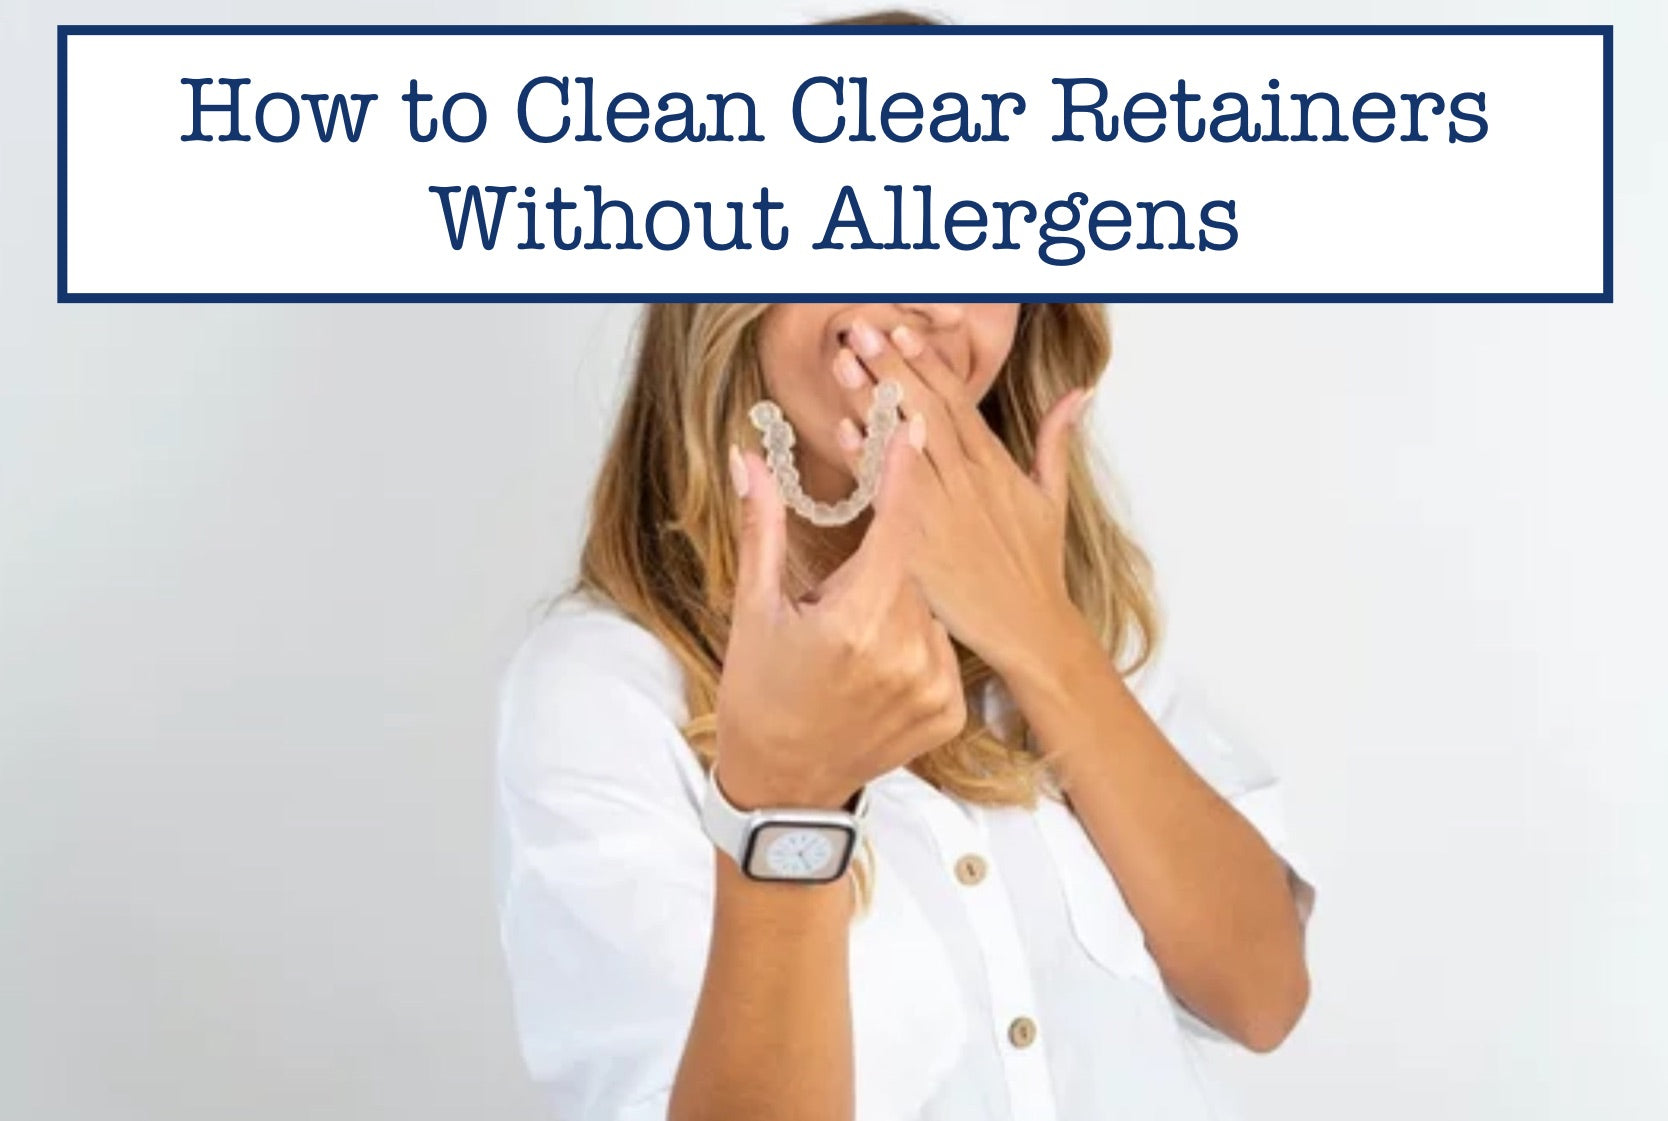 How to Clean Clear Retainers Without Allergens